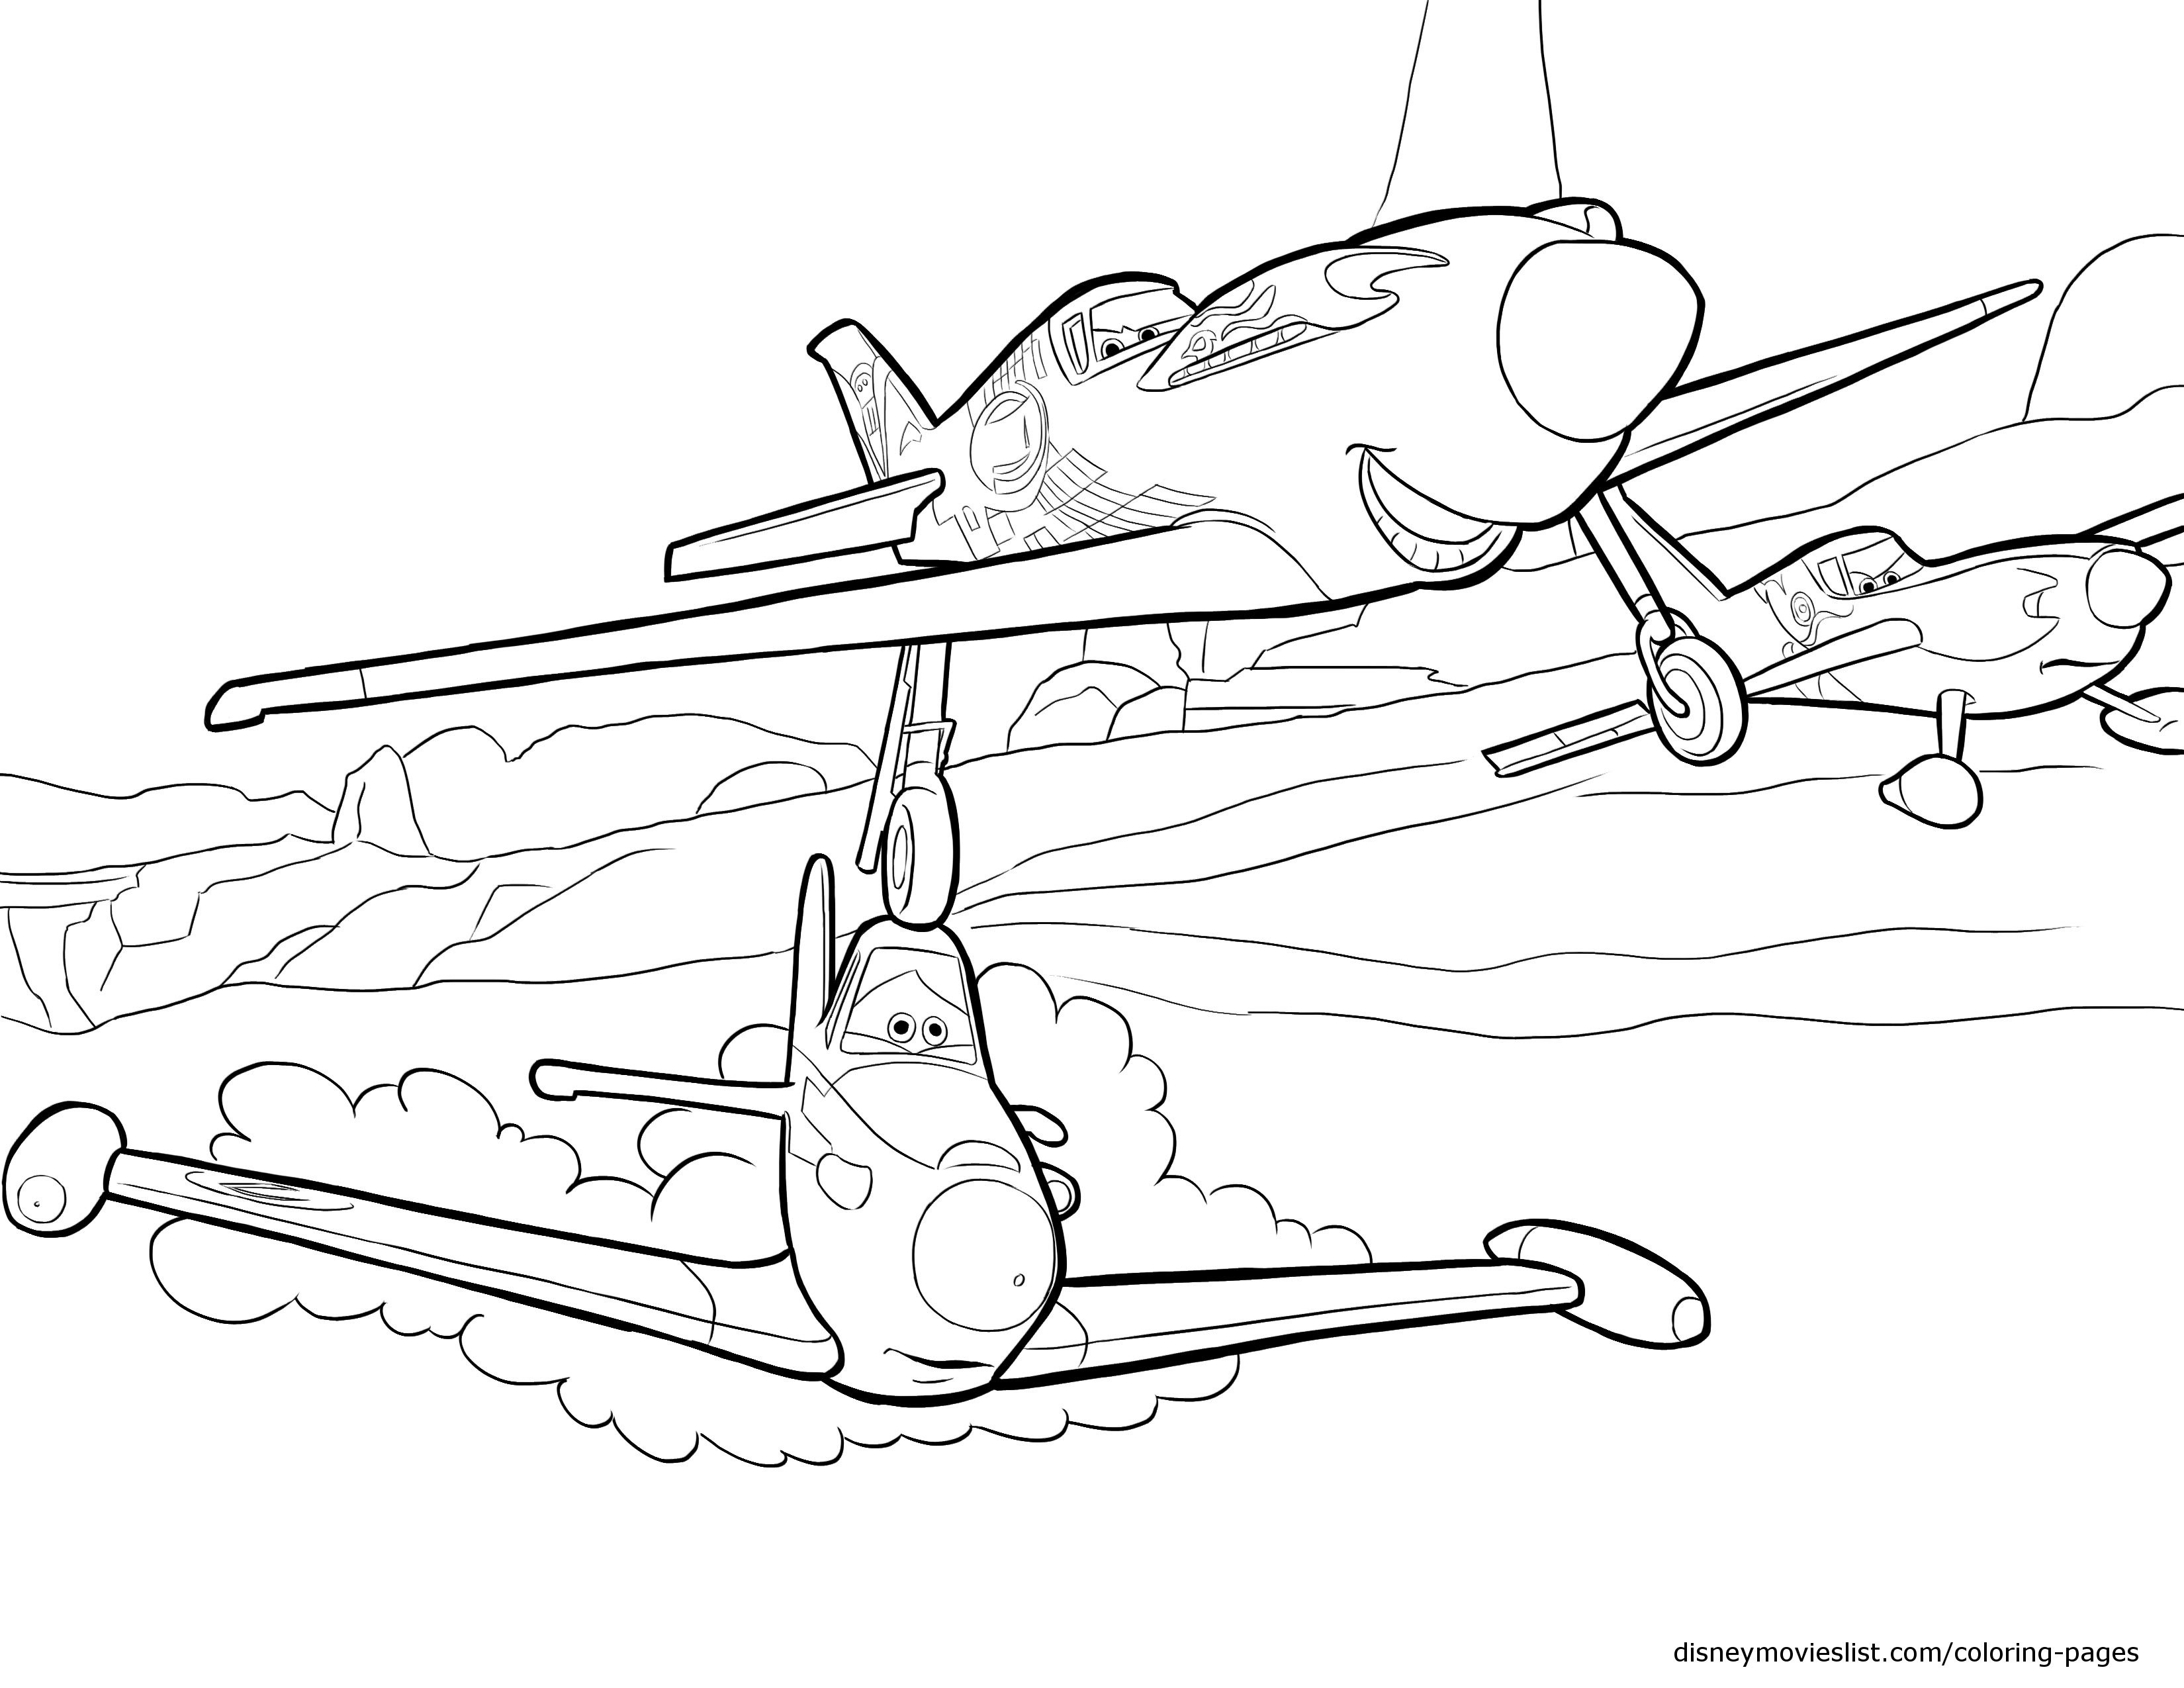 Plane Coloring Pages
 Drawn aircraft coloring page Pencil and in color drawn